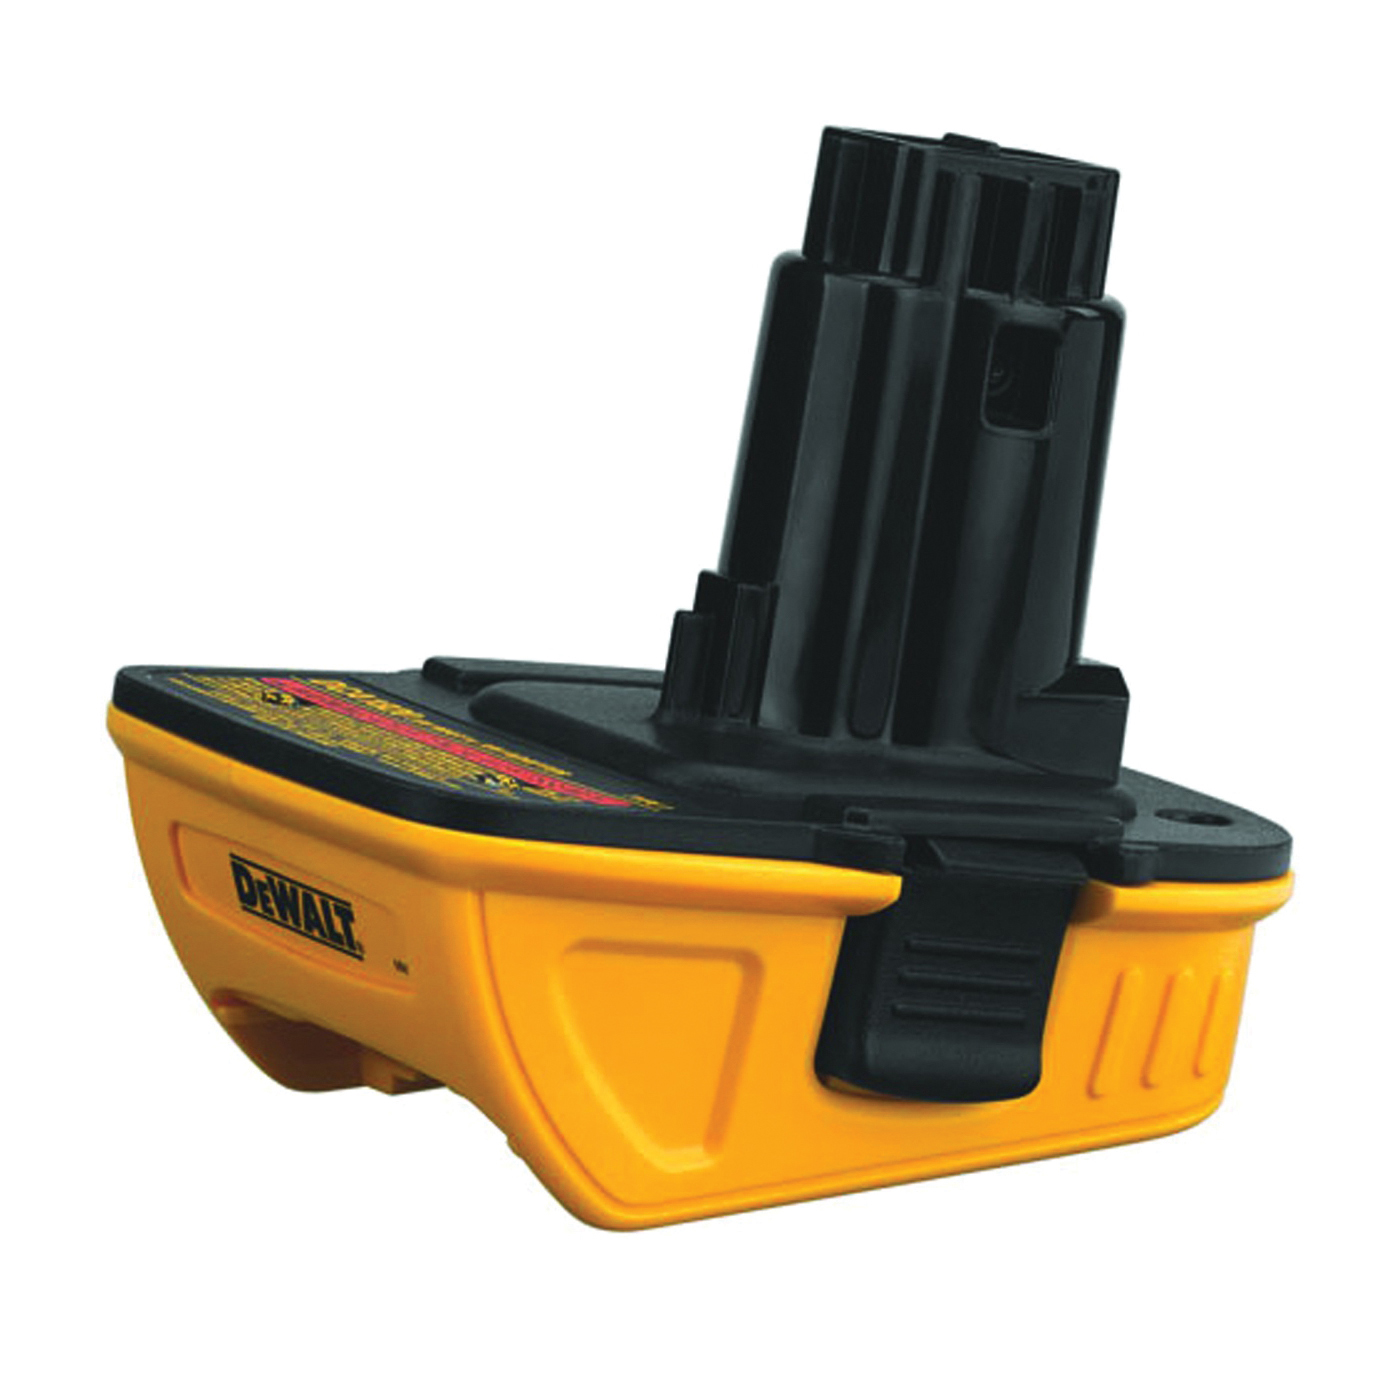 DeWALT DCA1820 Battery Adapter, 18 to 20 V Input, Battery Included: Yes, Includes: (1) 18 V to 20 V MAX Adapter